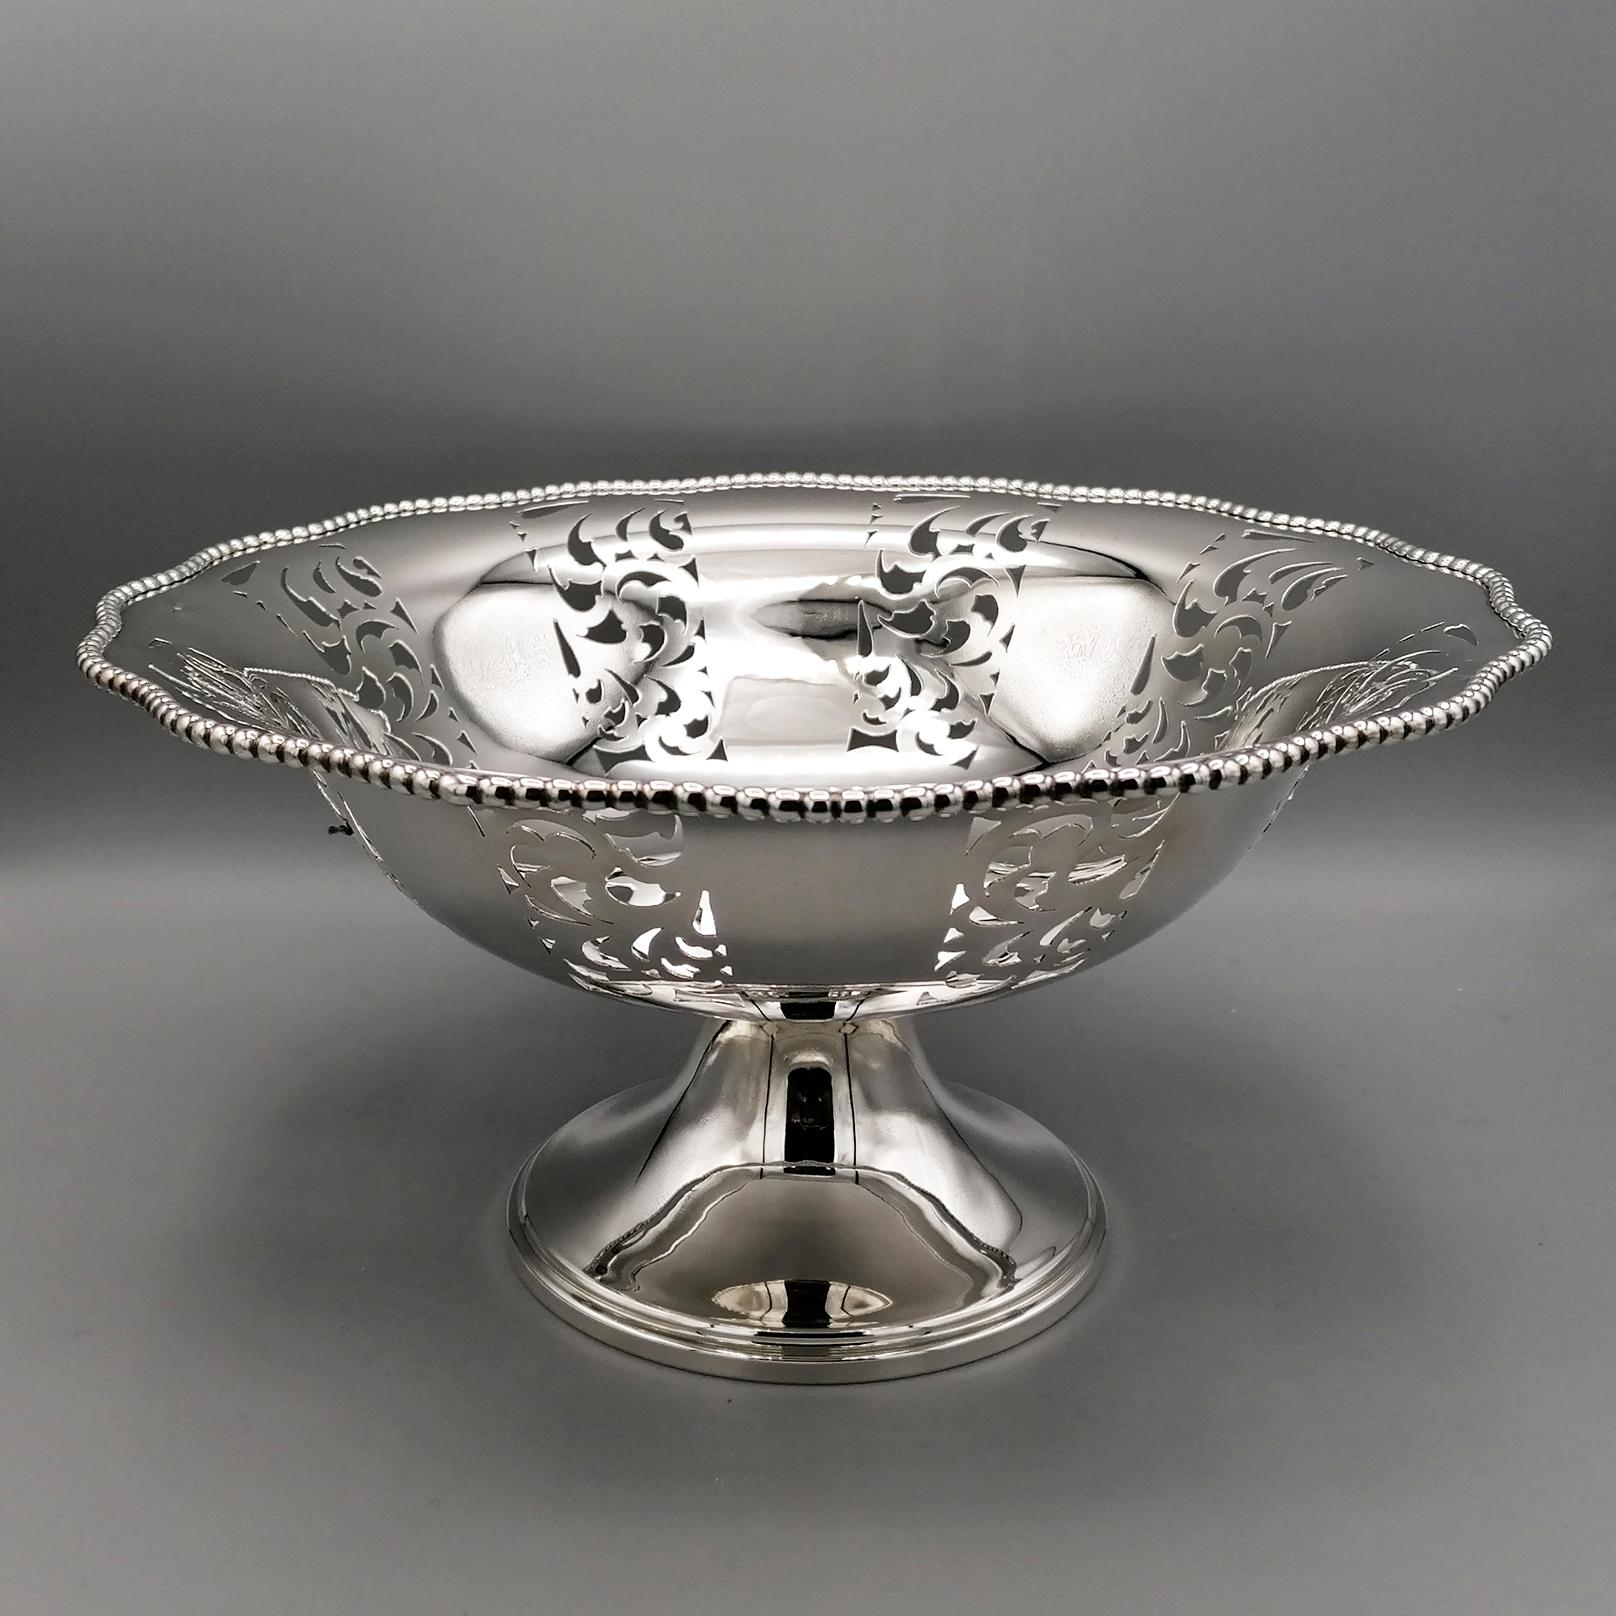 Centerpiece with sterling silver base.
The base is round and smooth while the bowl has been shaped and fretworked by hand with volutes.
A beaded border has been welded to the wavy edge.
Object very simple to the eye, easily colocabile in any type of